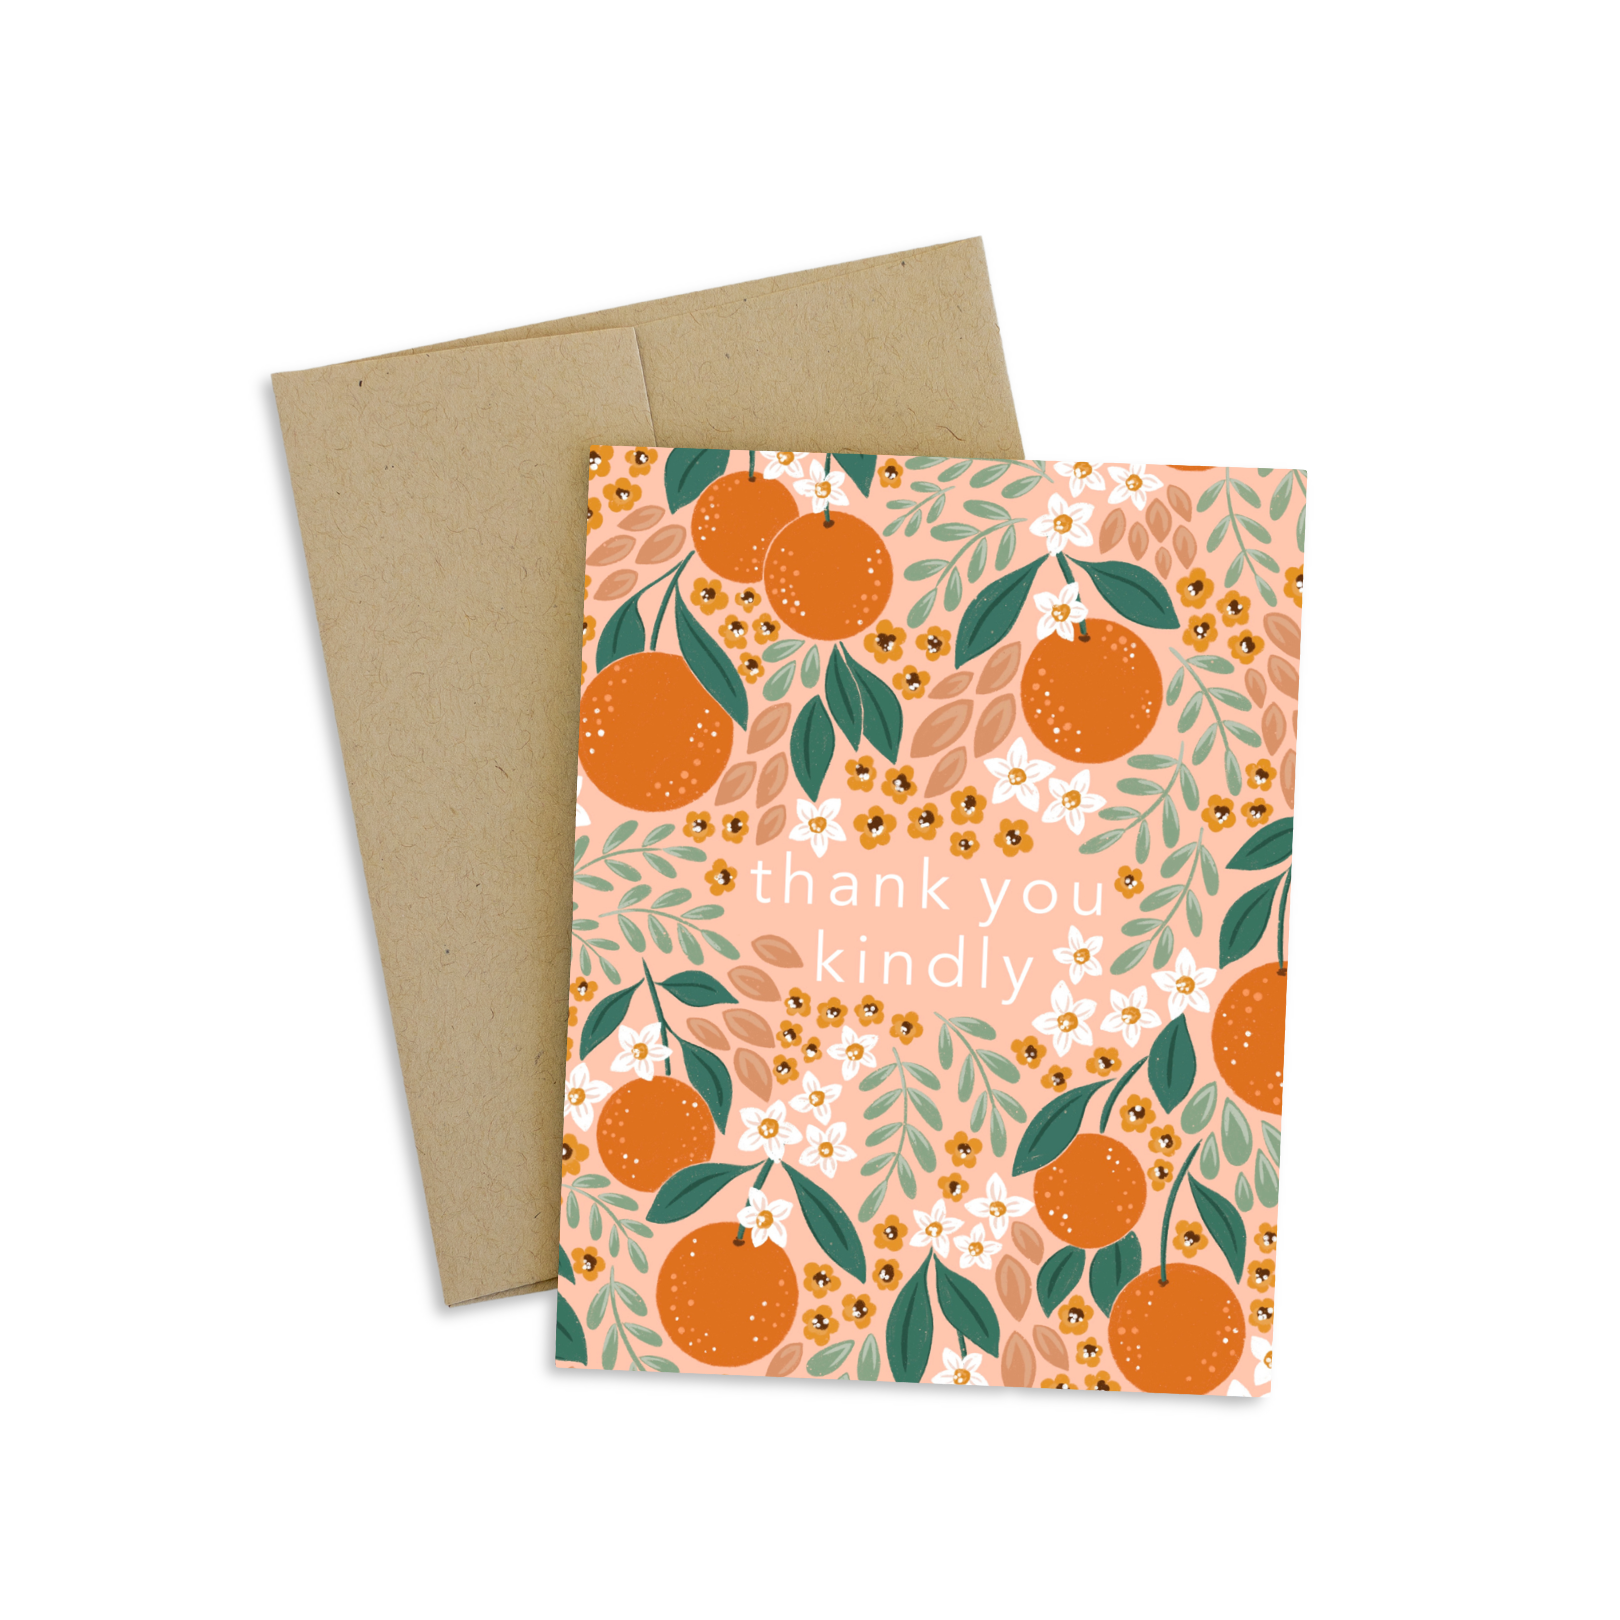 Greeting card with a floral and oranges design with text that reads "Thank you kindly" 